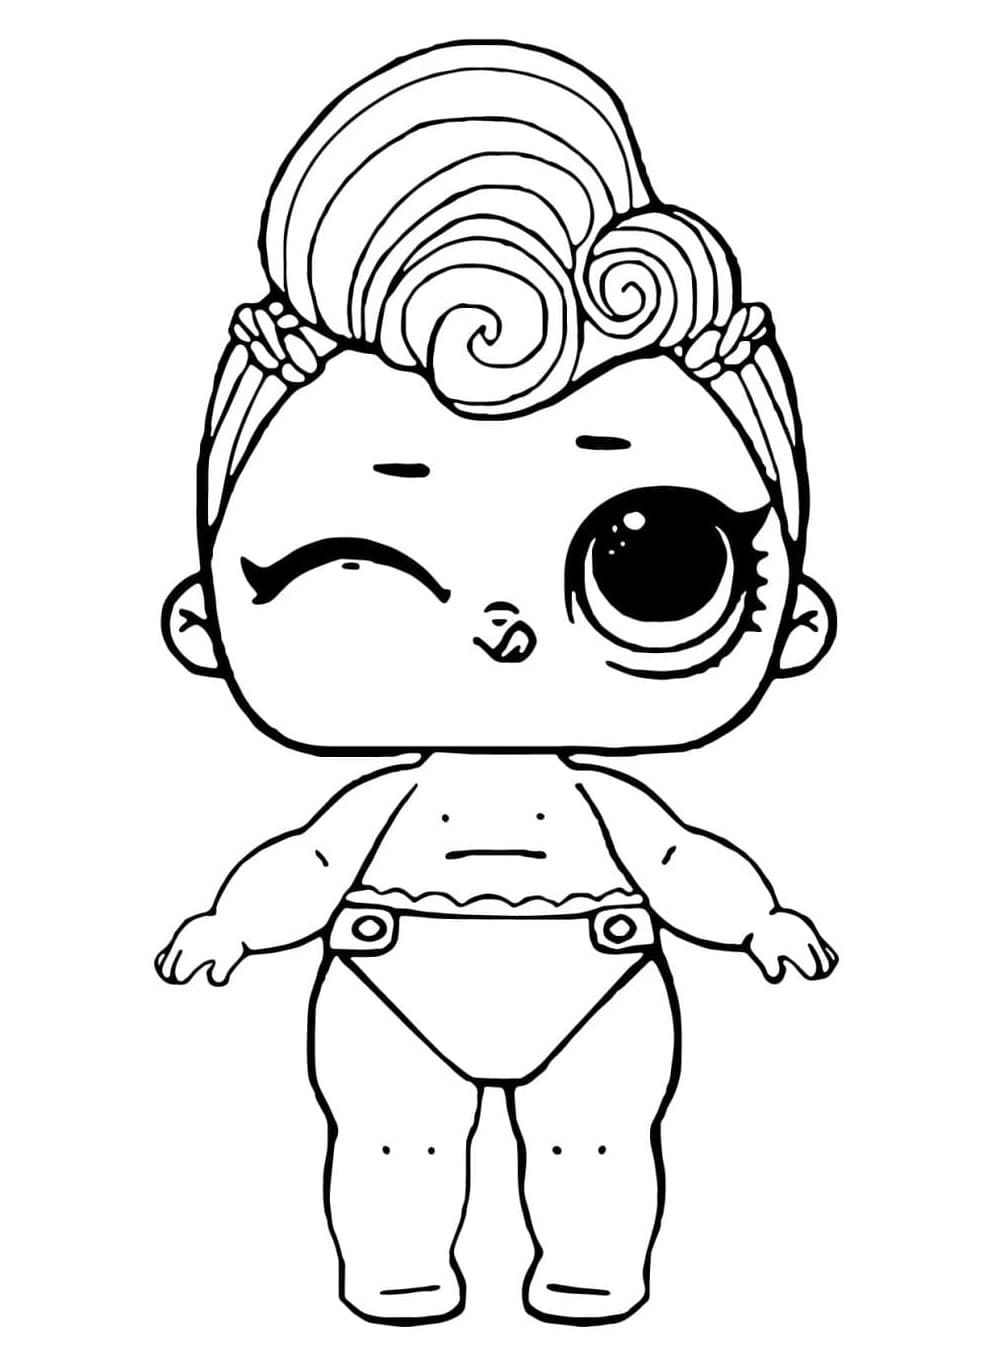 Lil Stardust Queen LOL Surprise coloring page